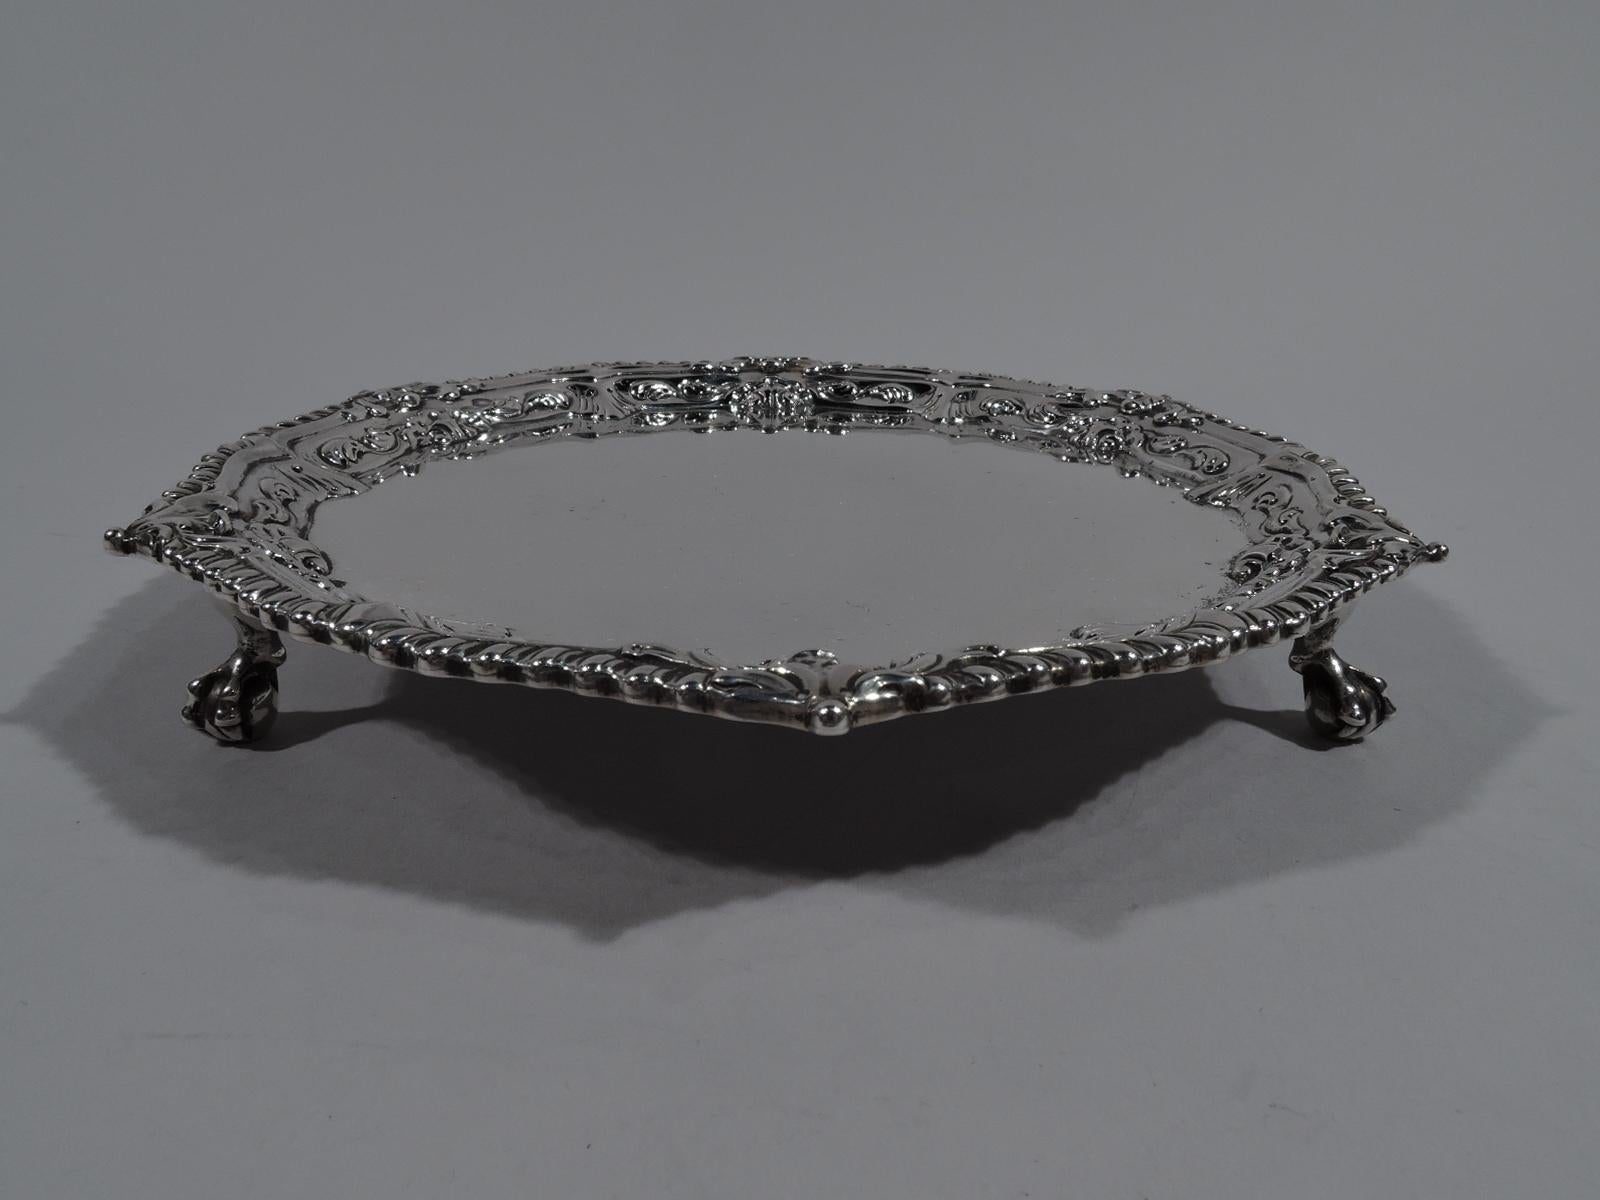 George III sterling silver salver. Made by Ebenezer Coker in London in 1767. Round with leaf and gadroon rim. Three claw-and-ball feet. Four letter monogram engraved on underside. Affordable midcentury Georgian by a noted silversmith. Fully marked.